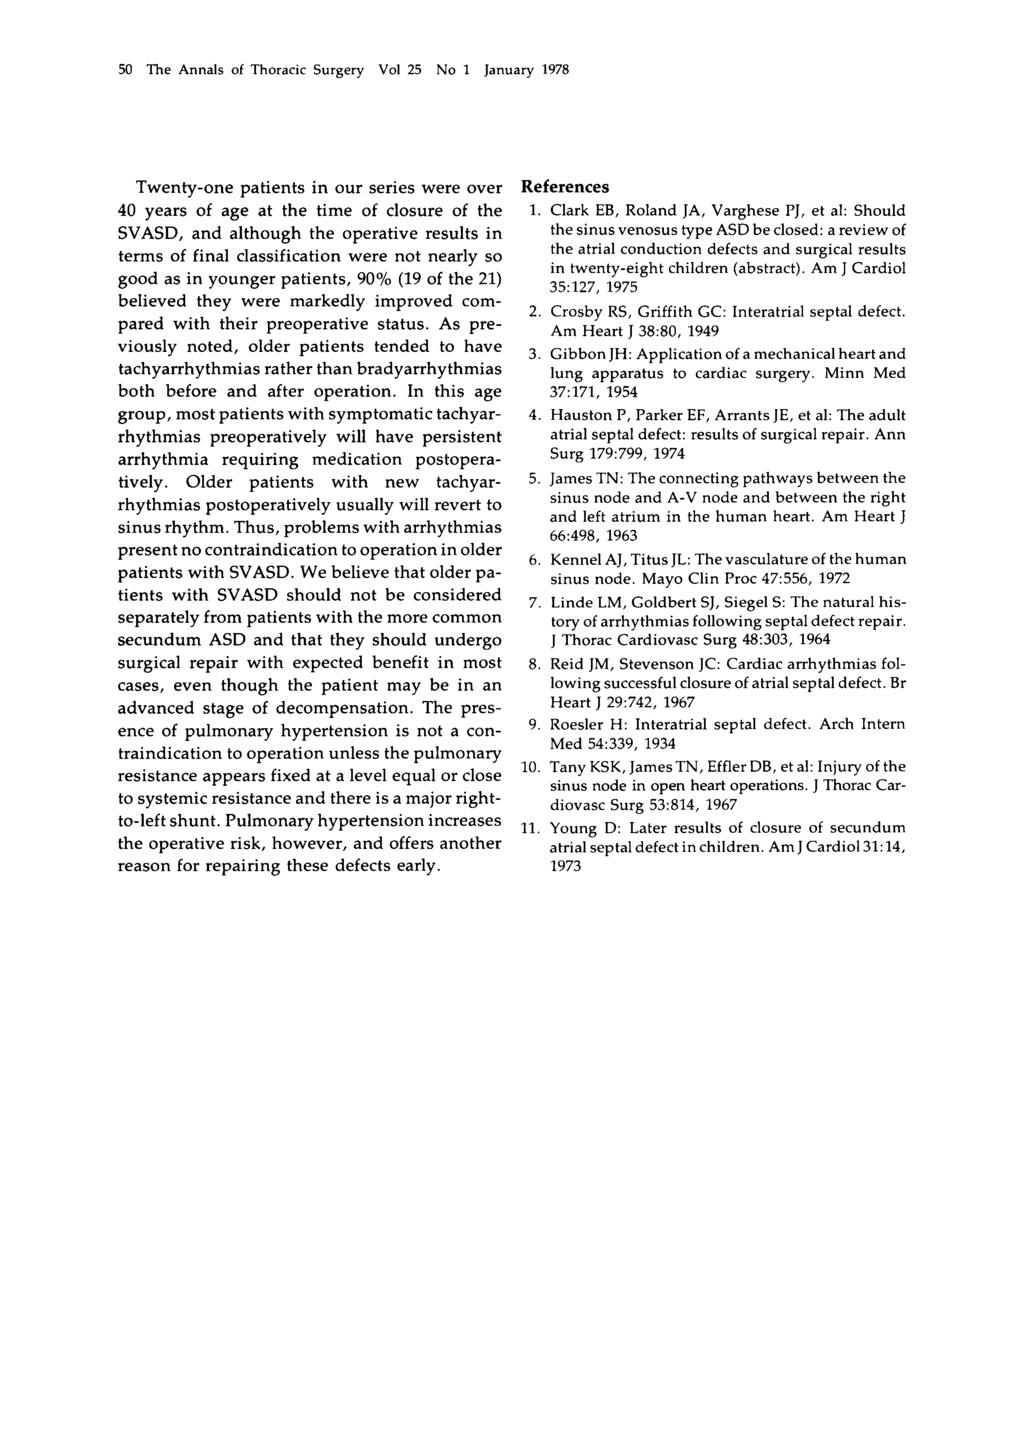 50 The Annals of Thoracic Surgery Vol 25 No 1 January 1978 Twenty-one patients in our series were over 40 years of age at the time of closure of the SVASD, and although the operative results in terms